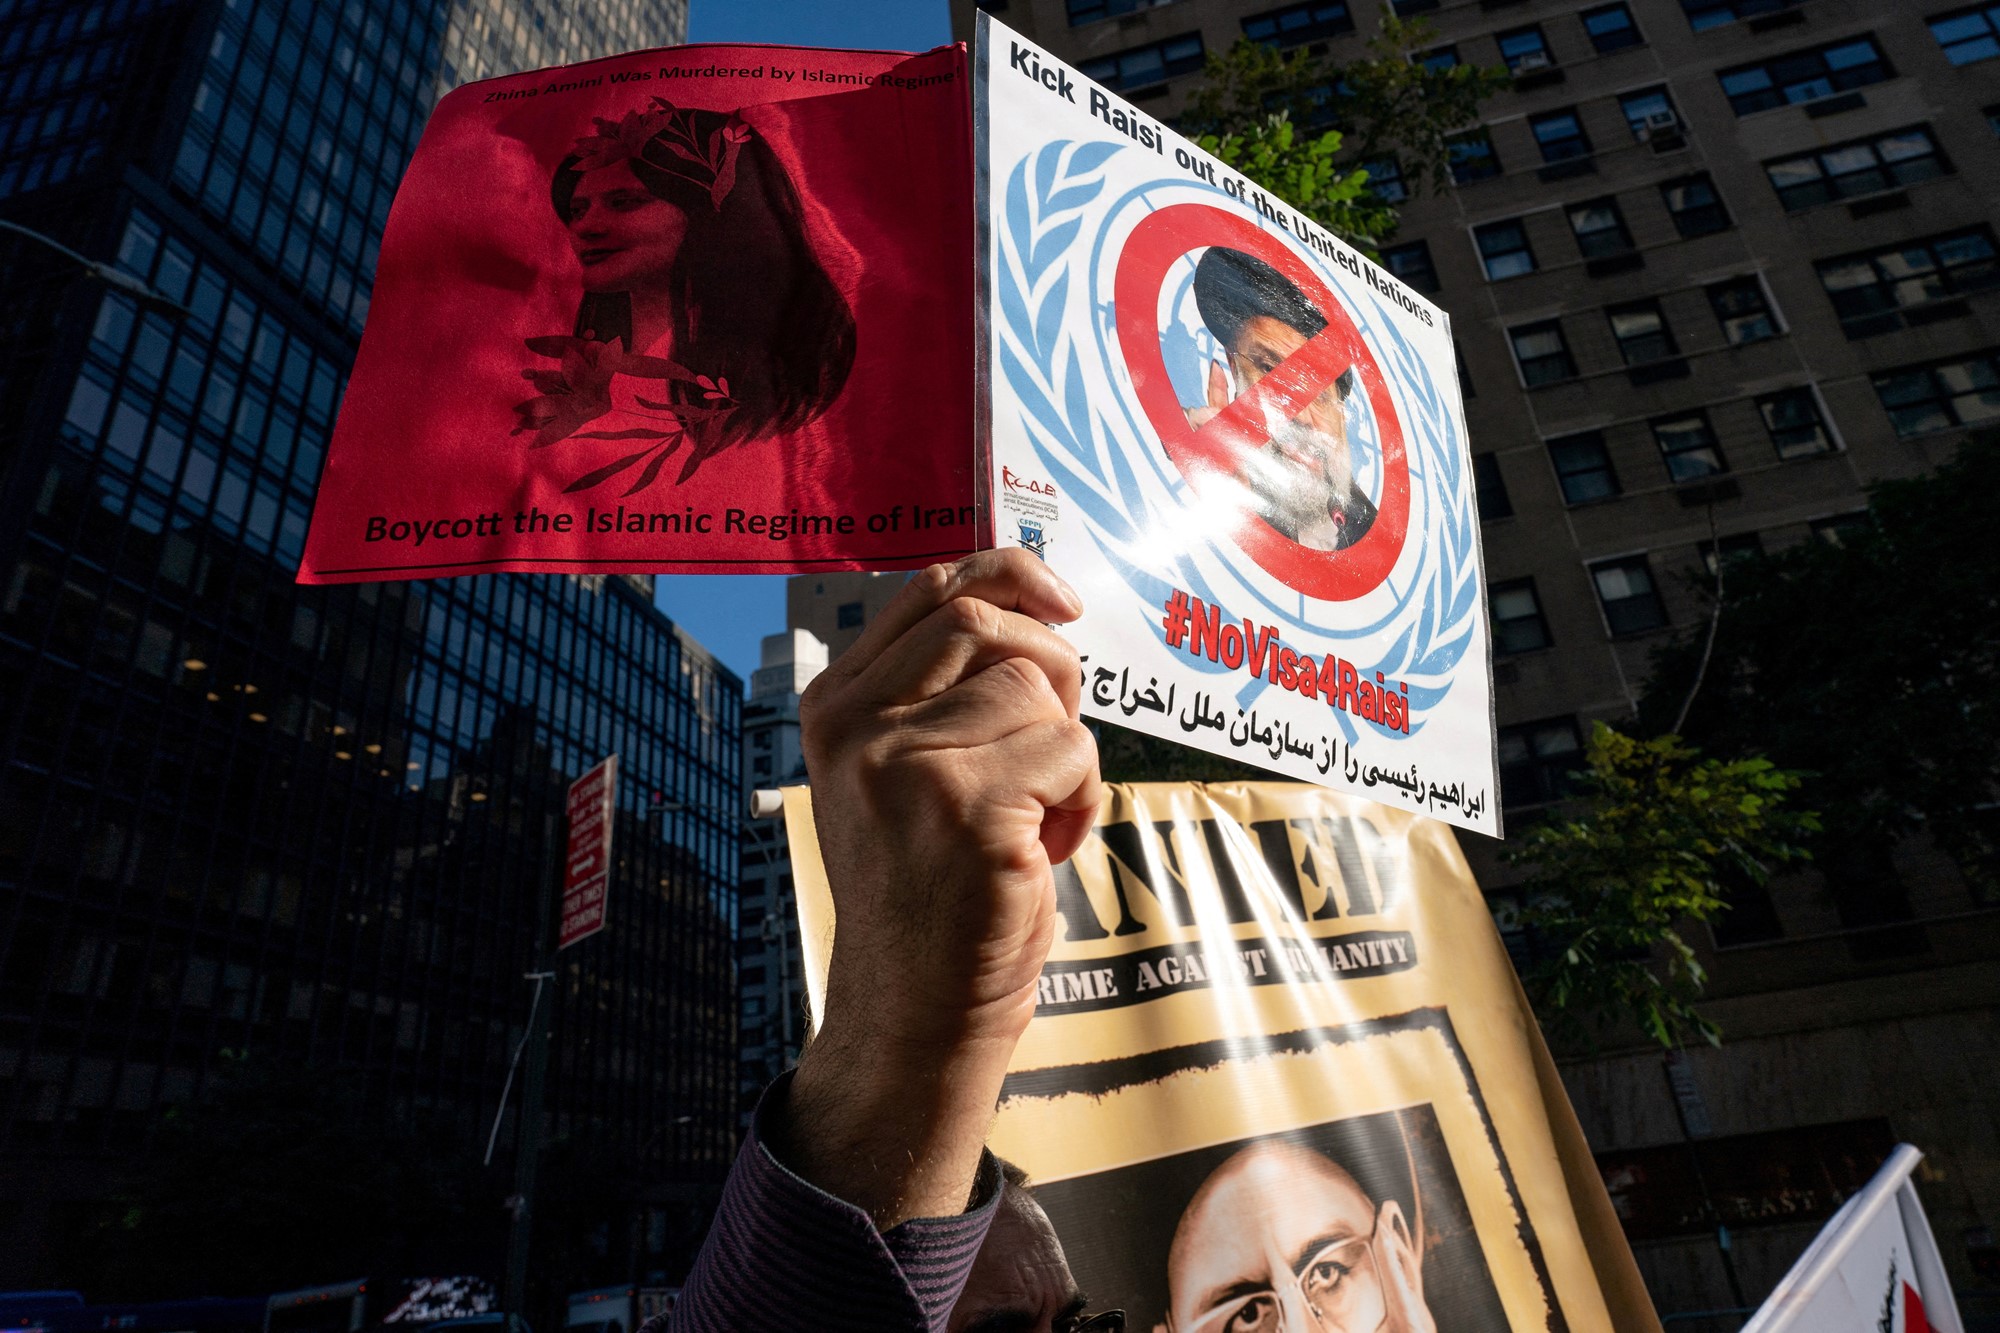 a person holds up a sign at a protest that says 'kick raisi out of the united nations'